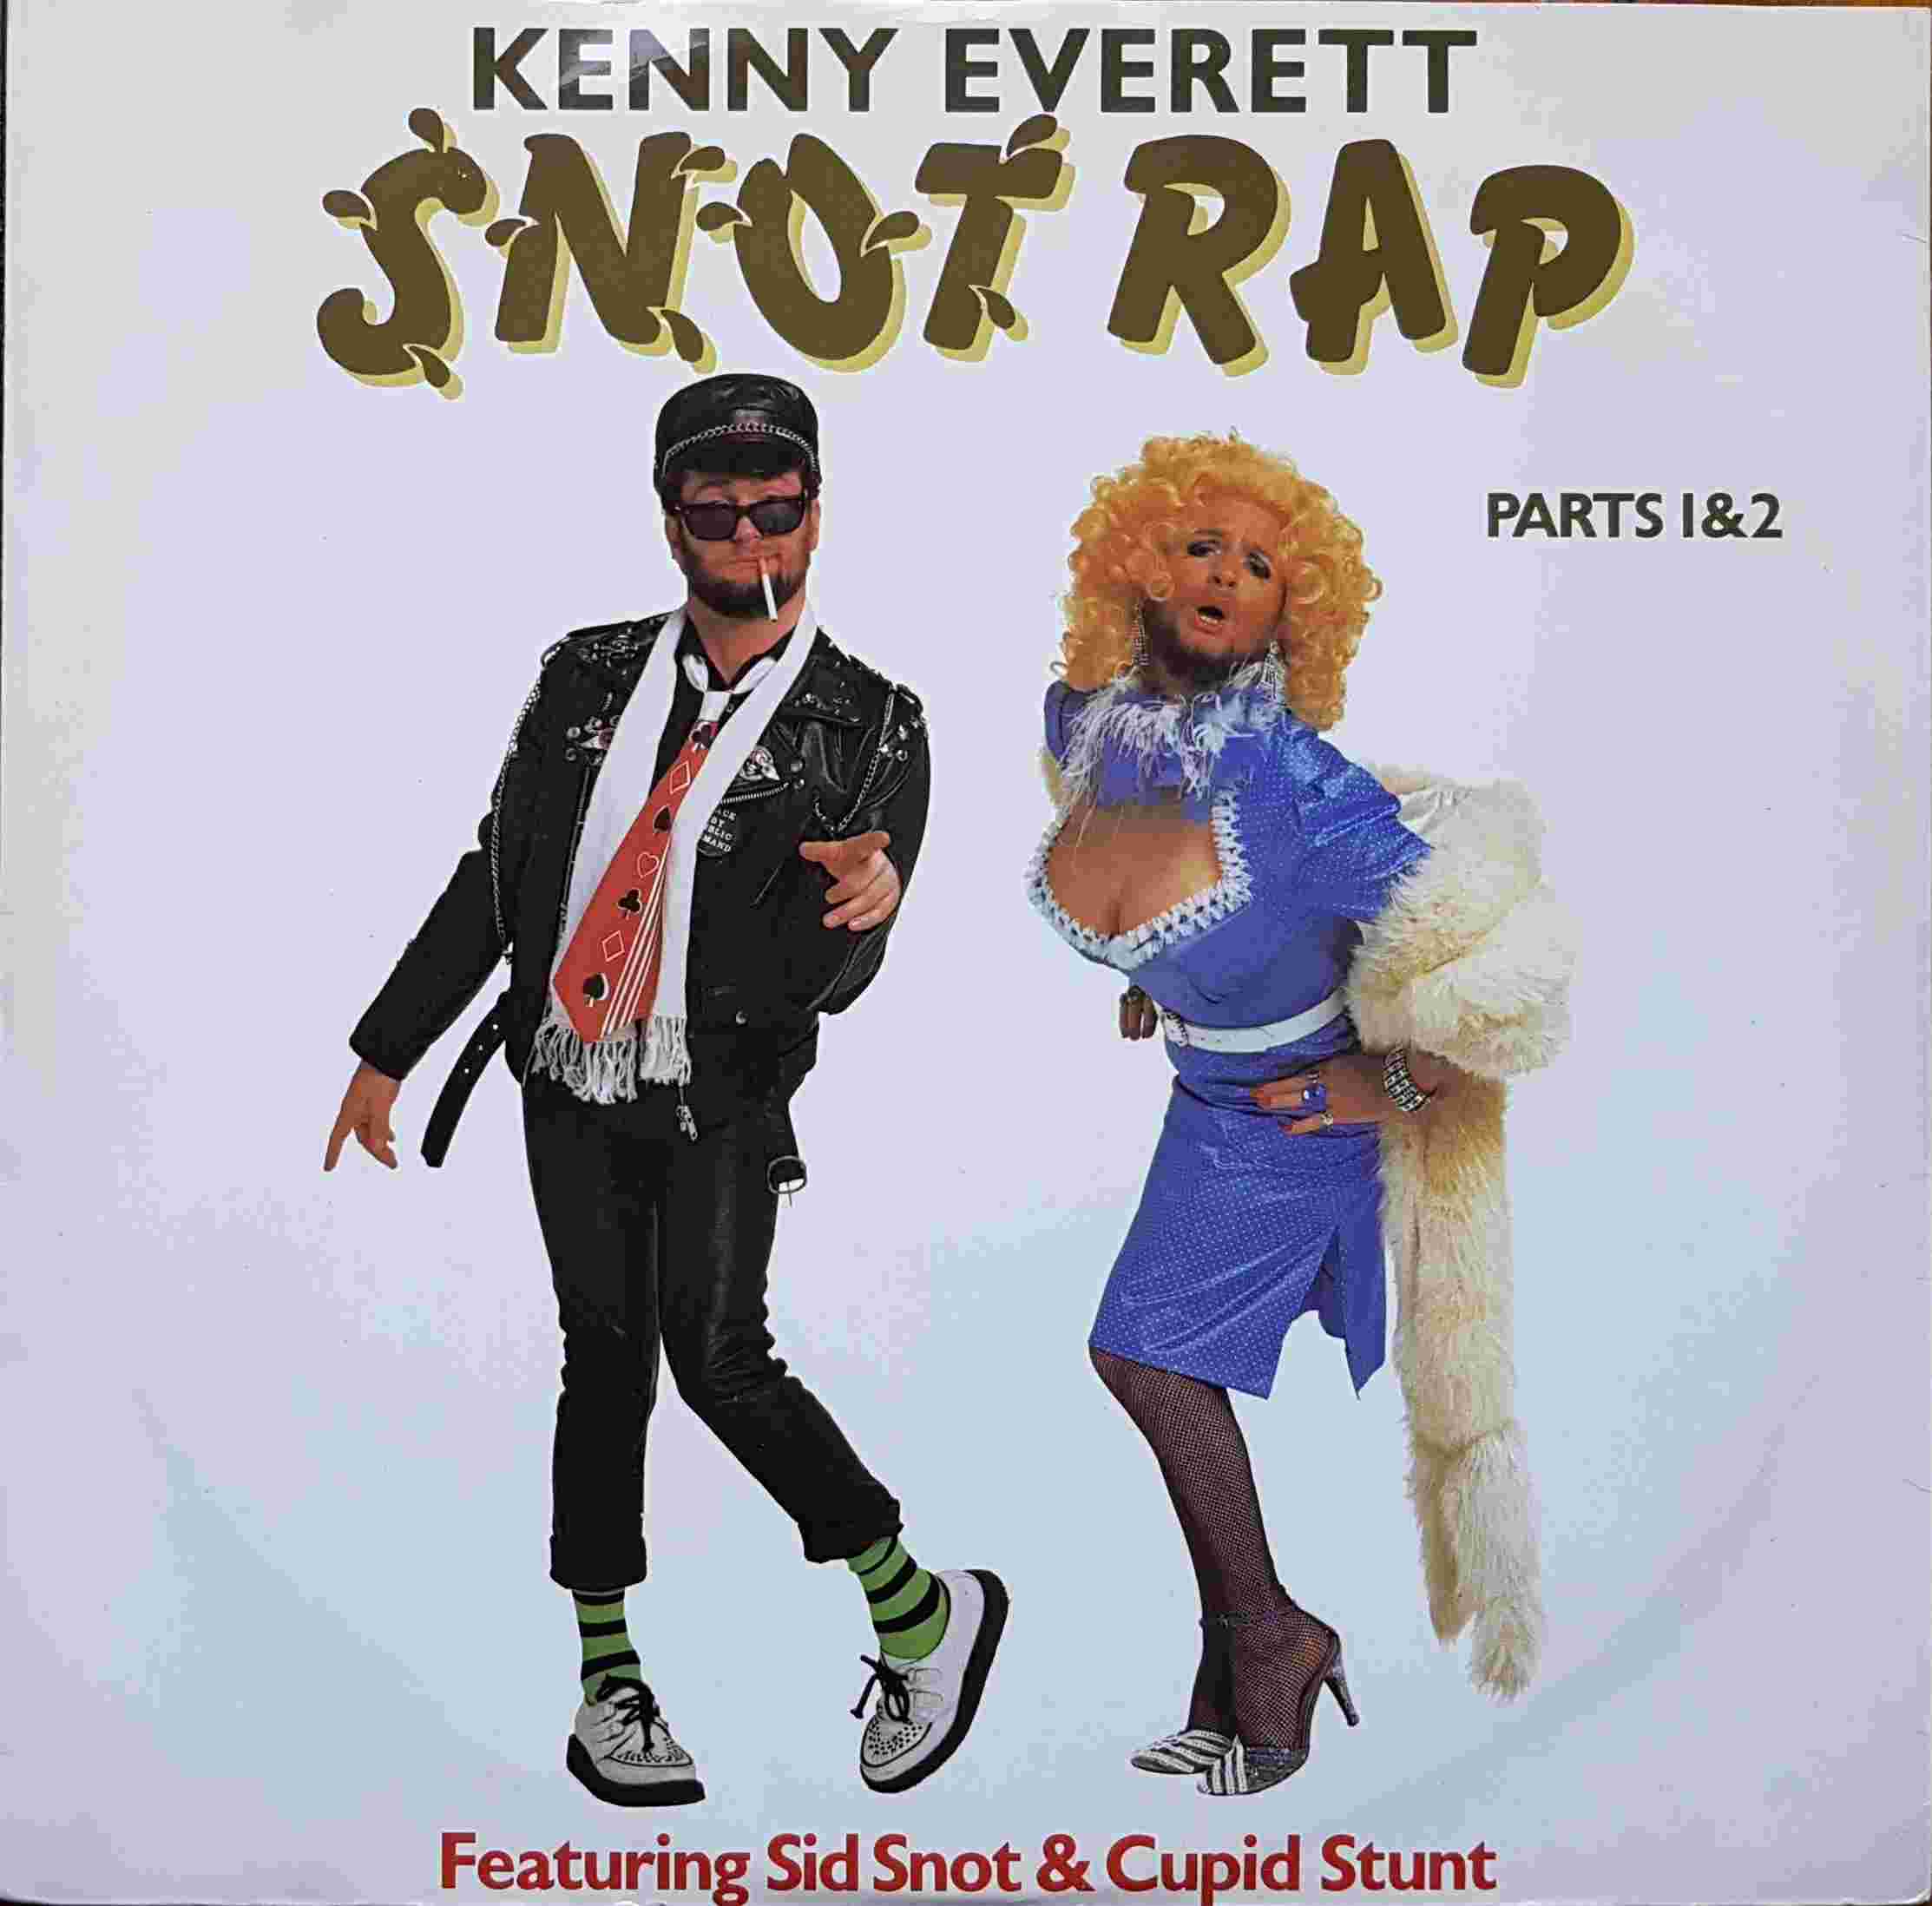 Picture of PC 68054 Snot rap (Kenny Everett television show) by artist Moran / Don / Cameron / Cryer from the BBC records and Tapes library